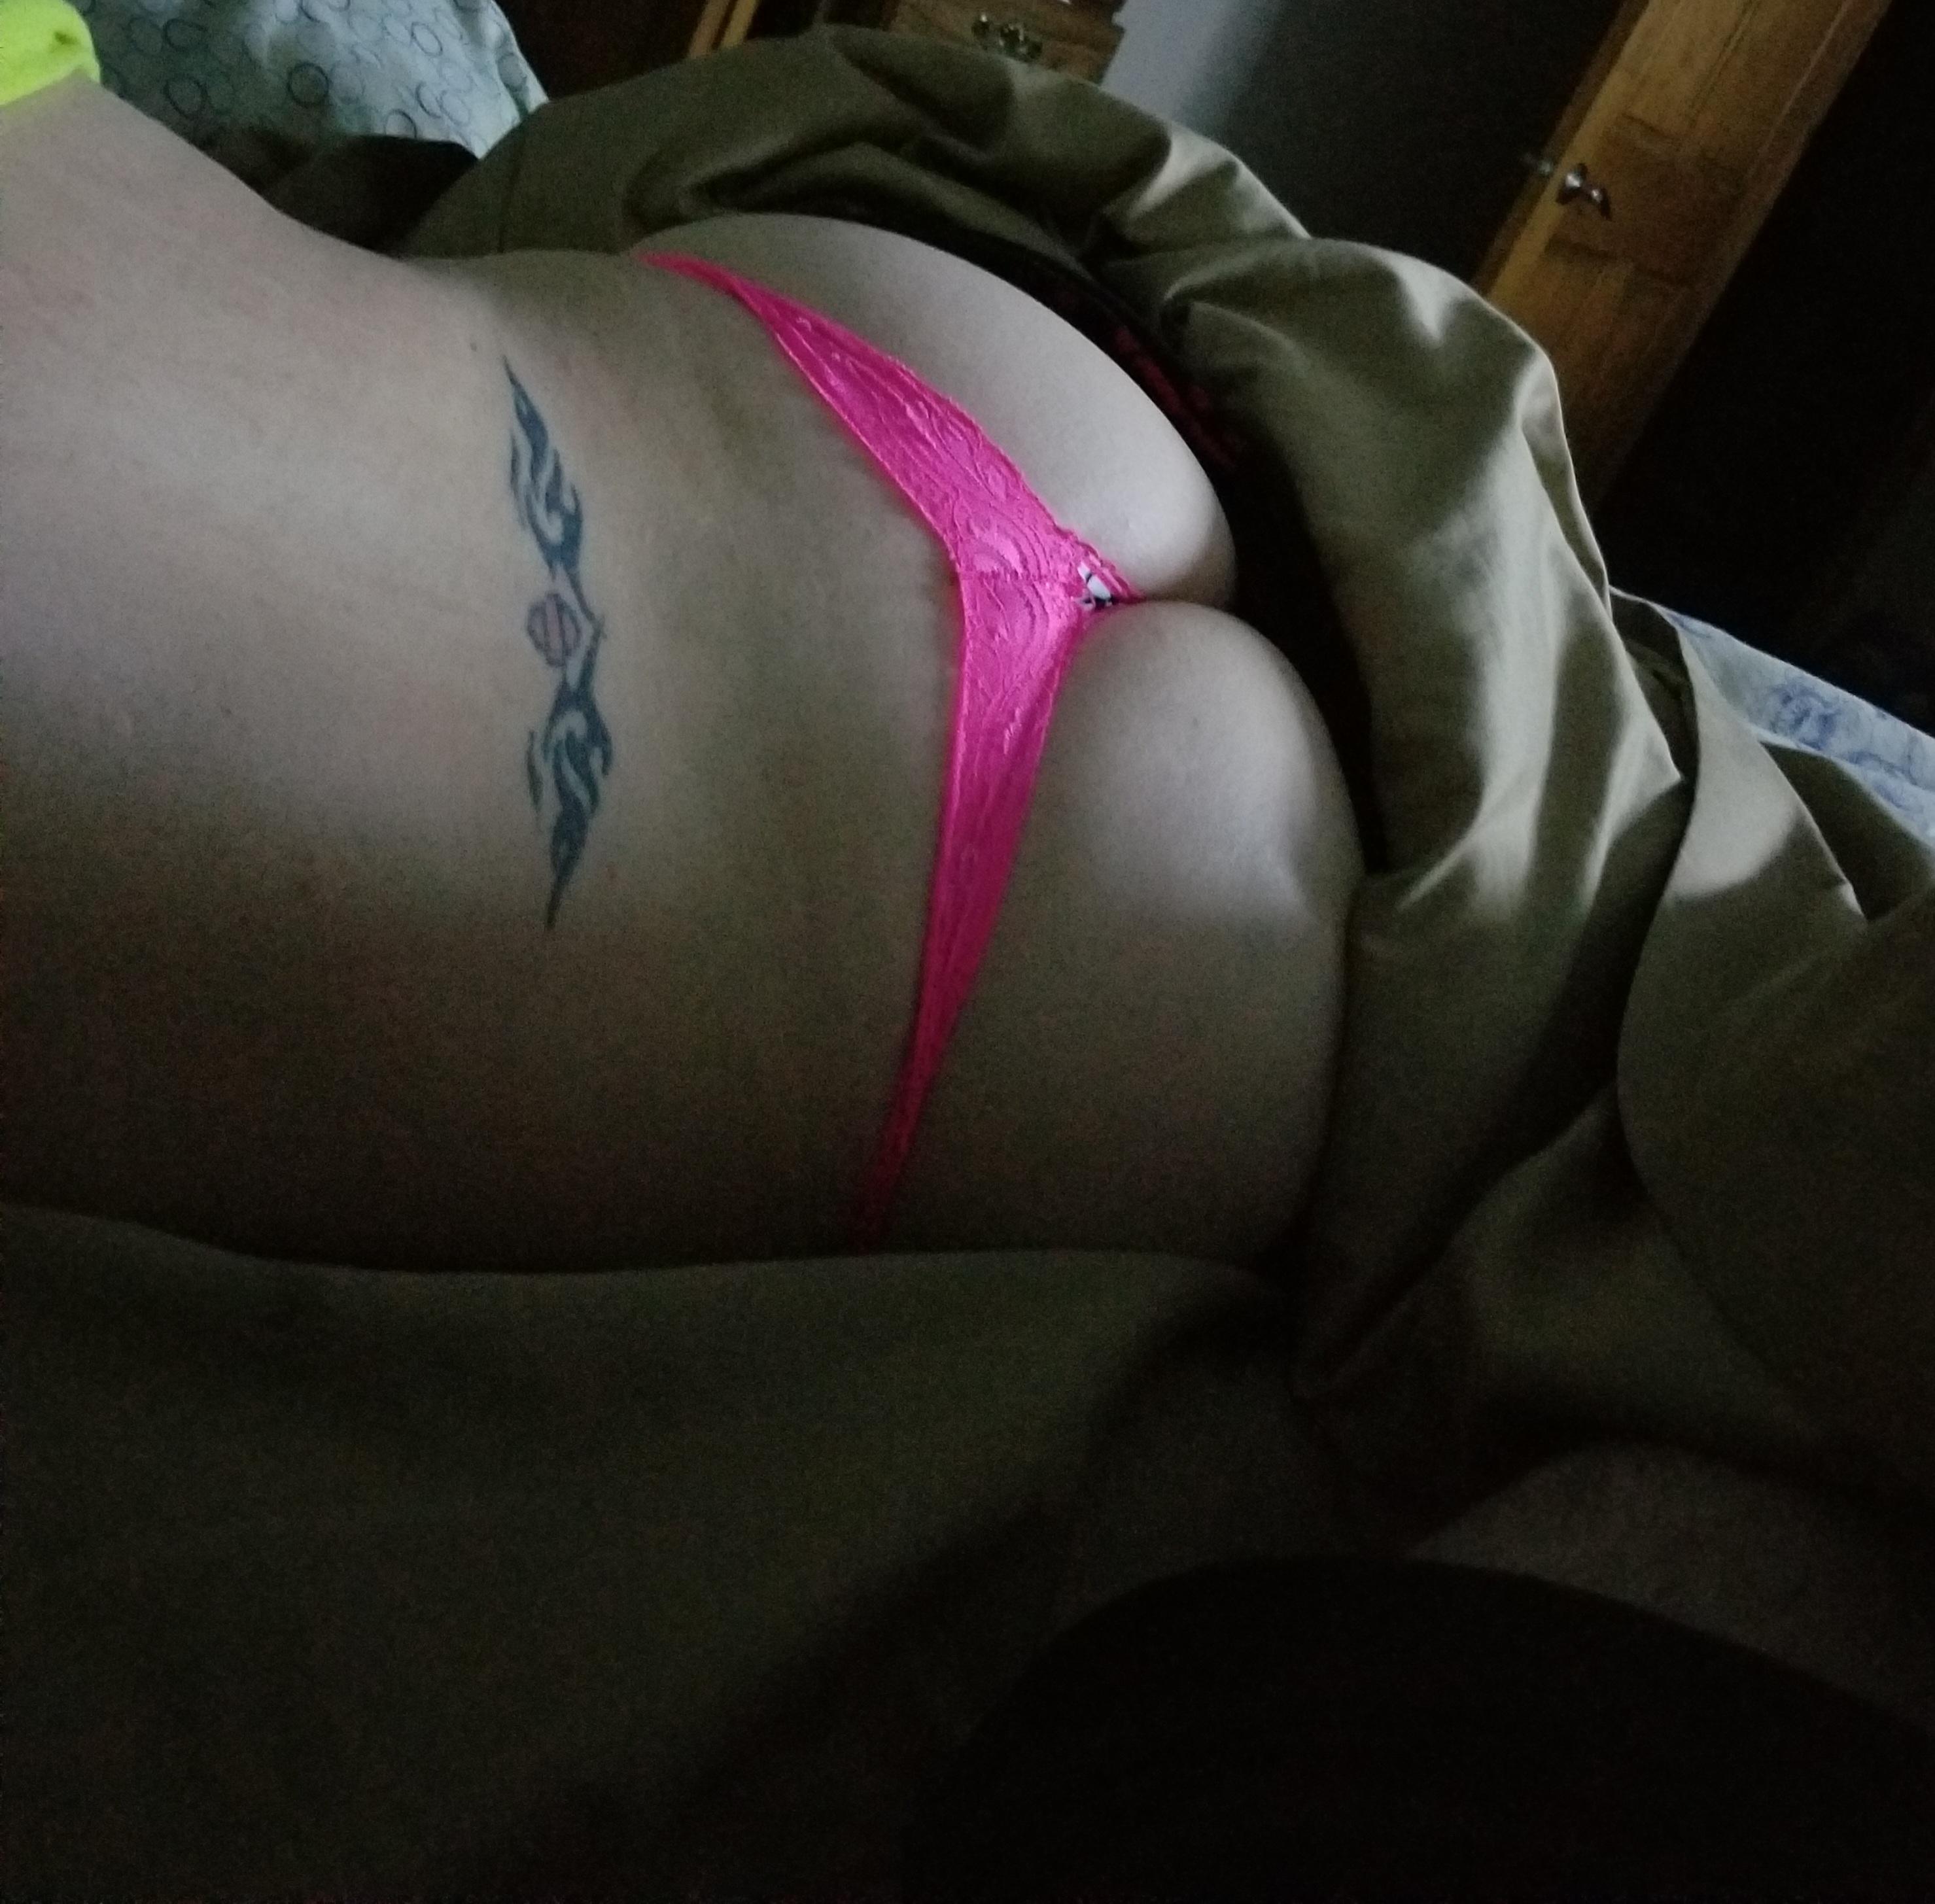 What do you think of my wifes ass?